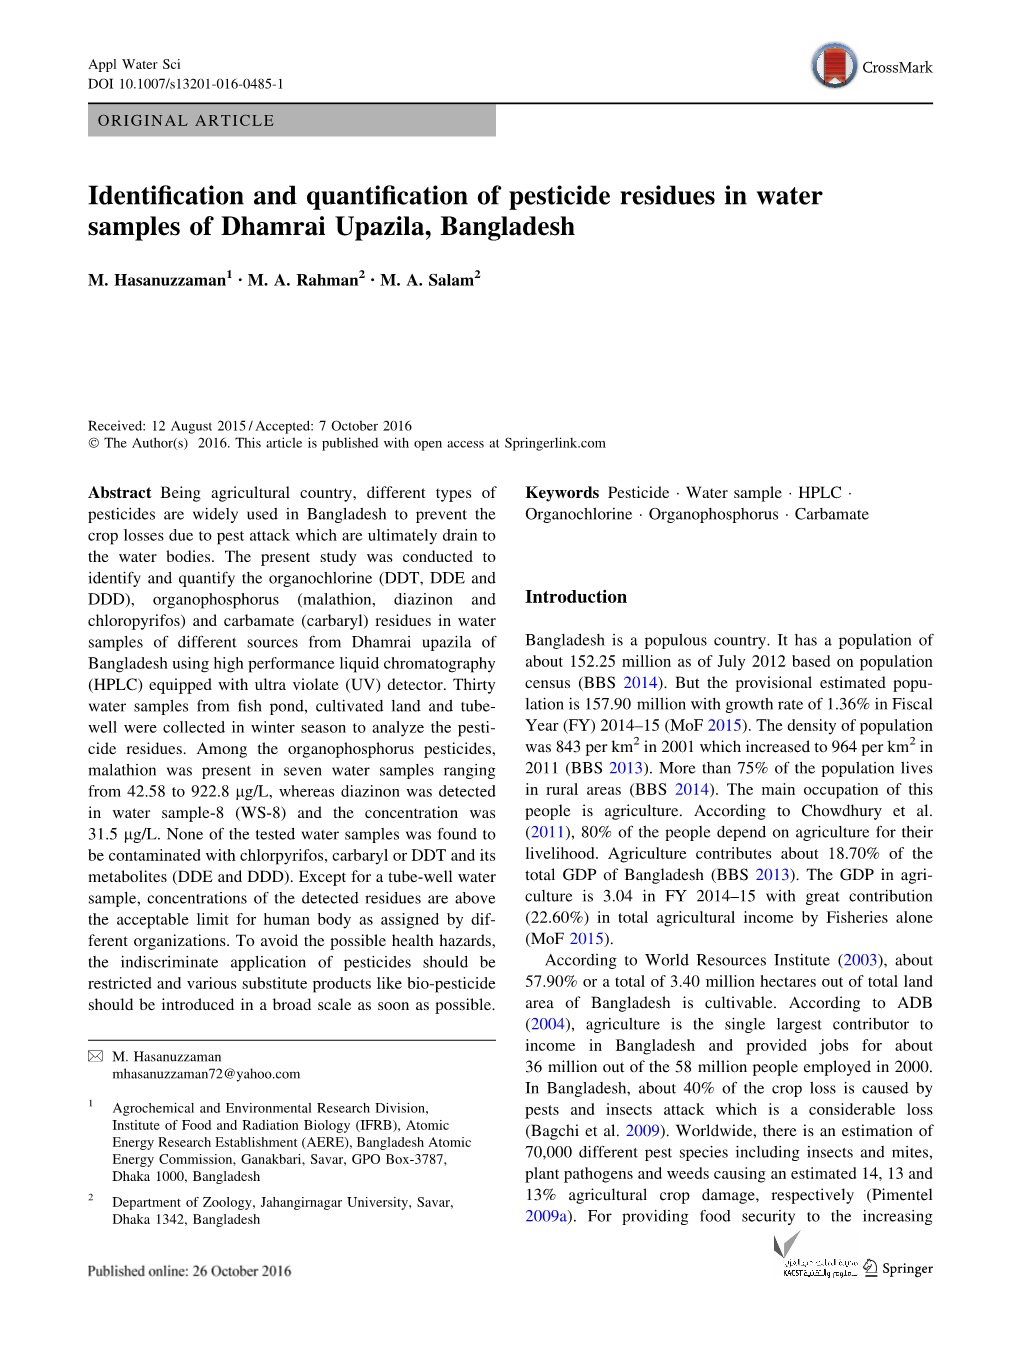 Identification and Quantification of Pesticide Residues in Water Samples